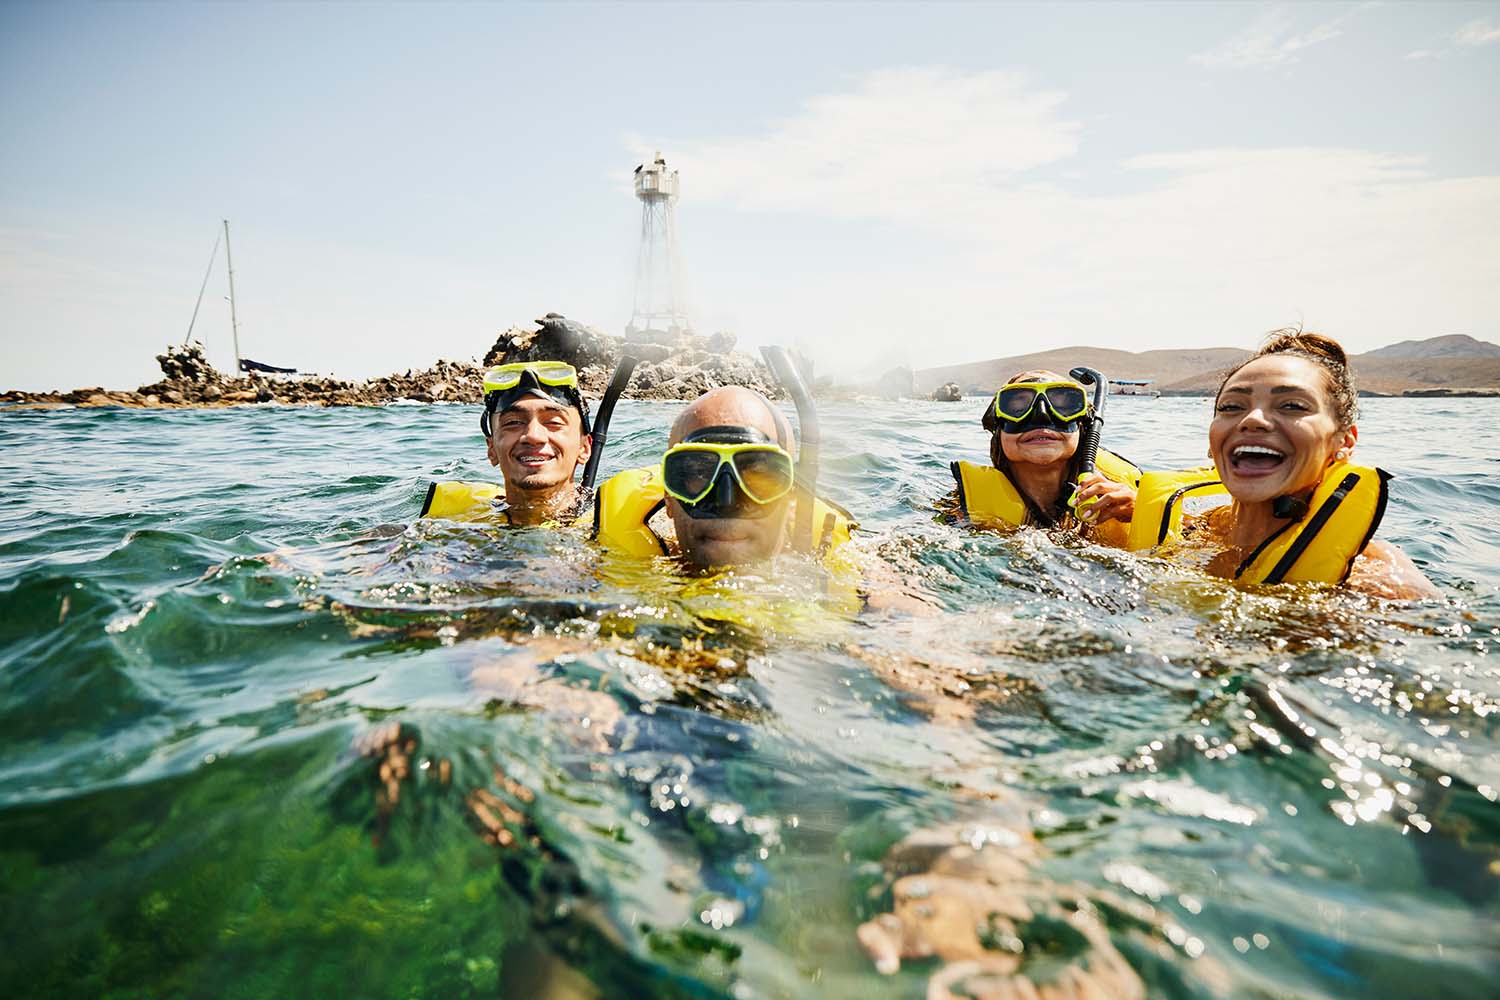 Picture of a smiling family on a snorkeling trip in the tropical ocean while on vacation